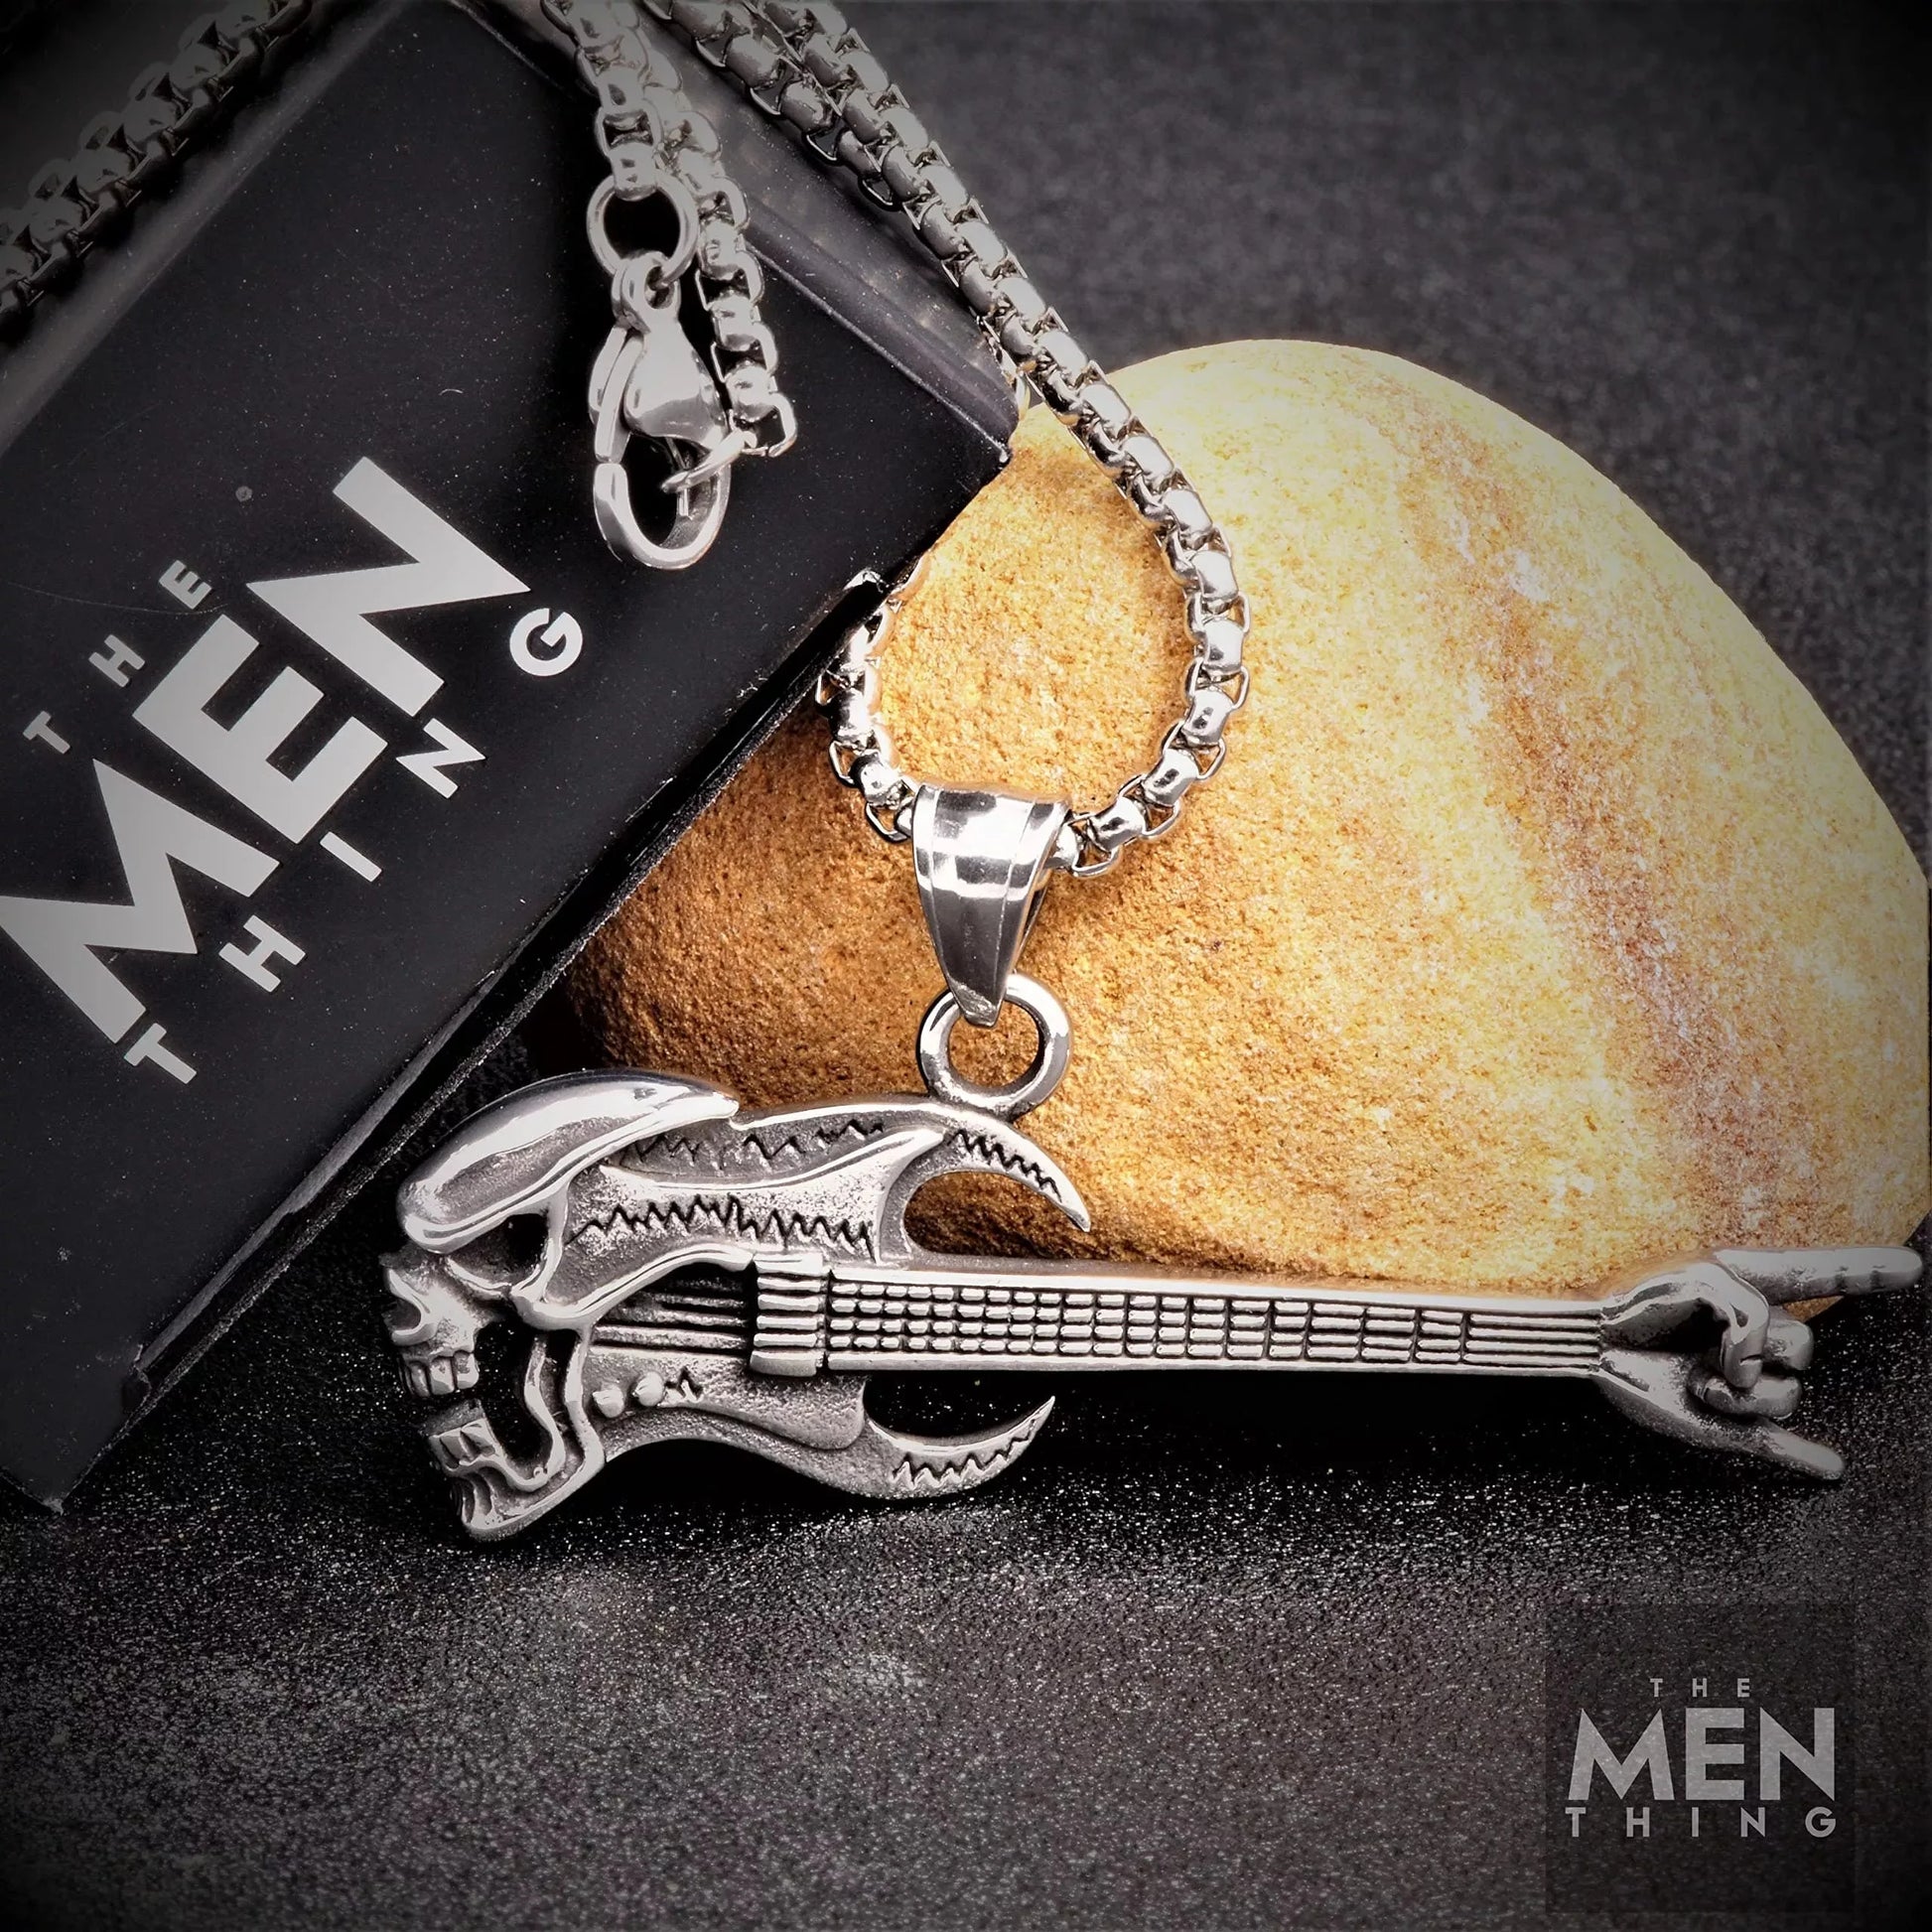 THE MEN THING Pendant for Men - Pure Titanium Steel Guitar Pendant with 24inch Round Box Chain for Men & Boys